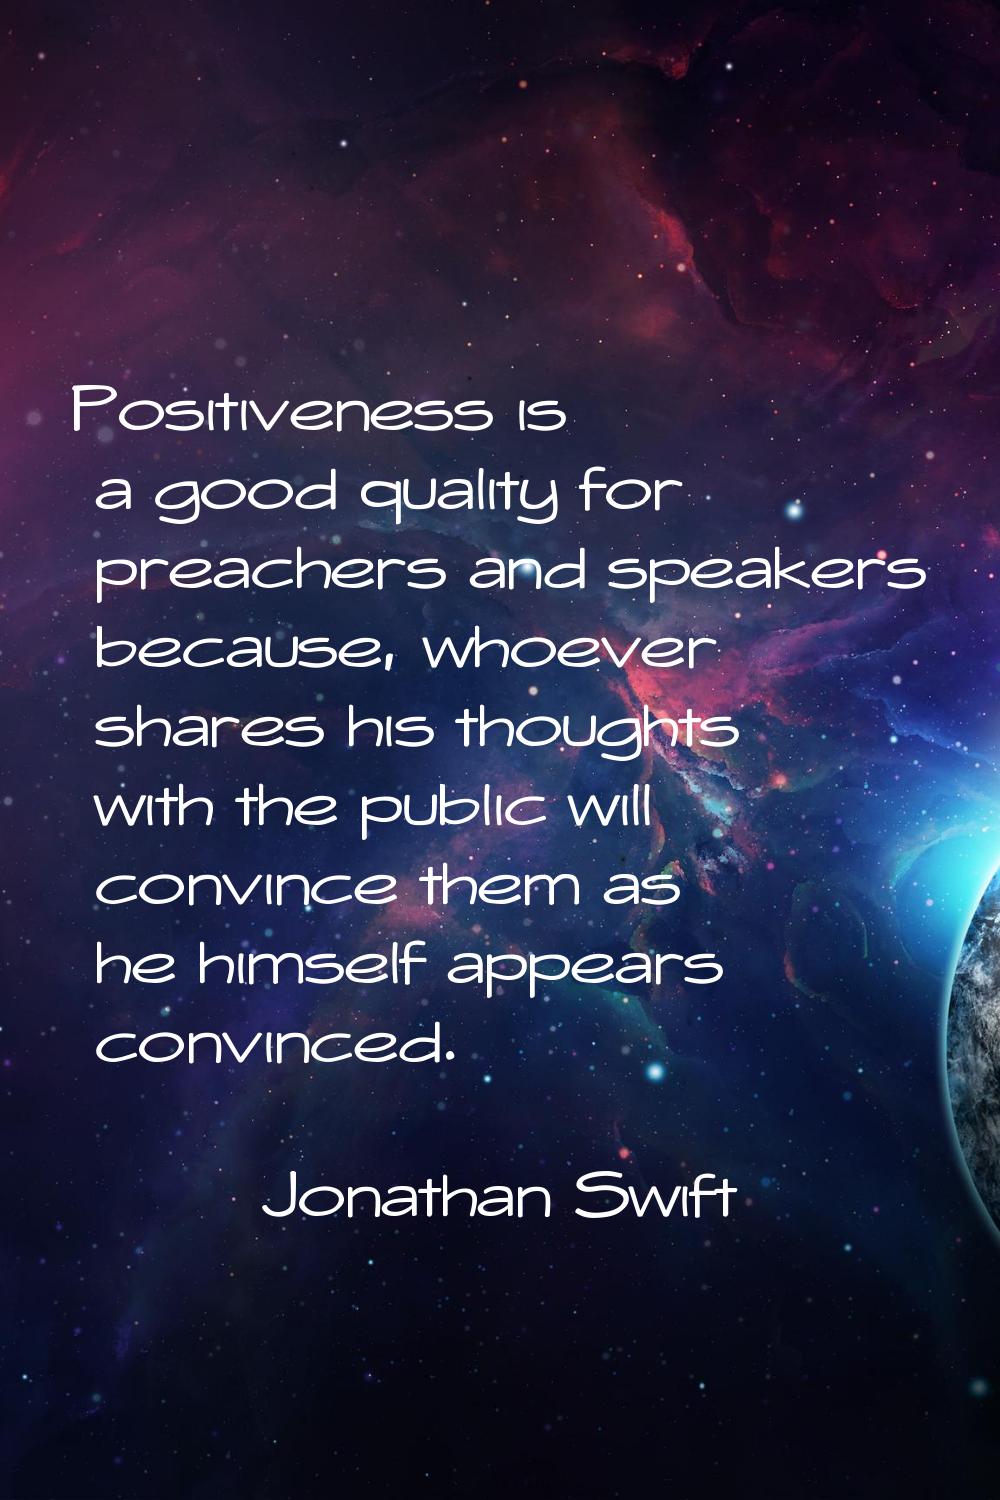 Positiveness is a good quality for preachers and speakers because, whoever shares his thoughts with